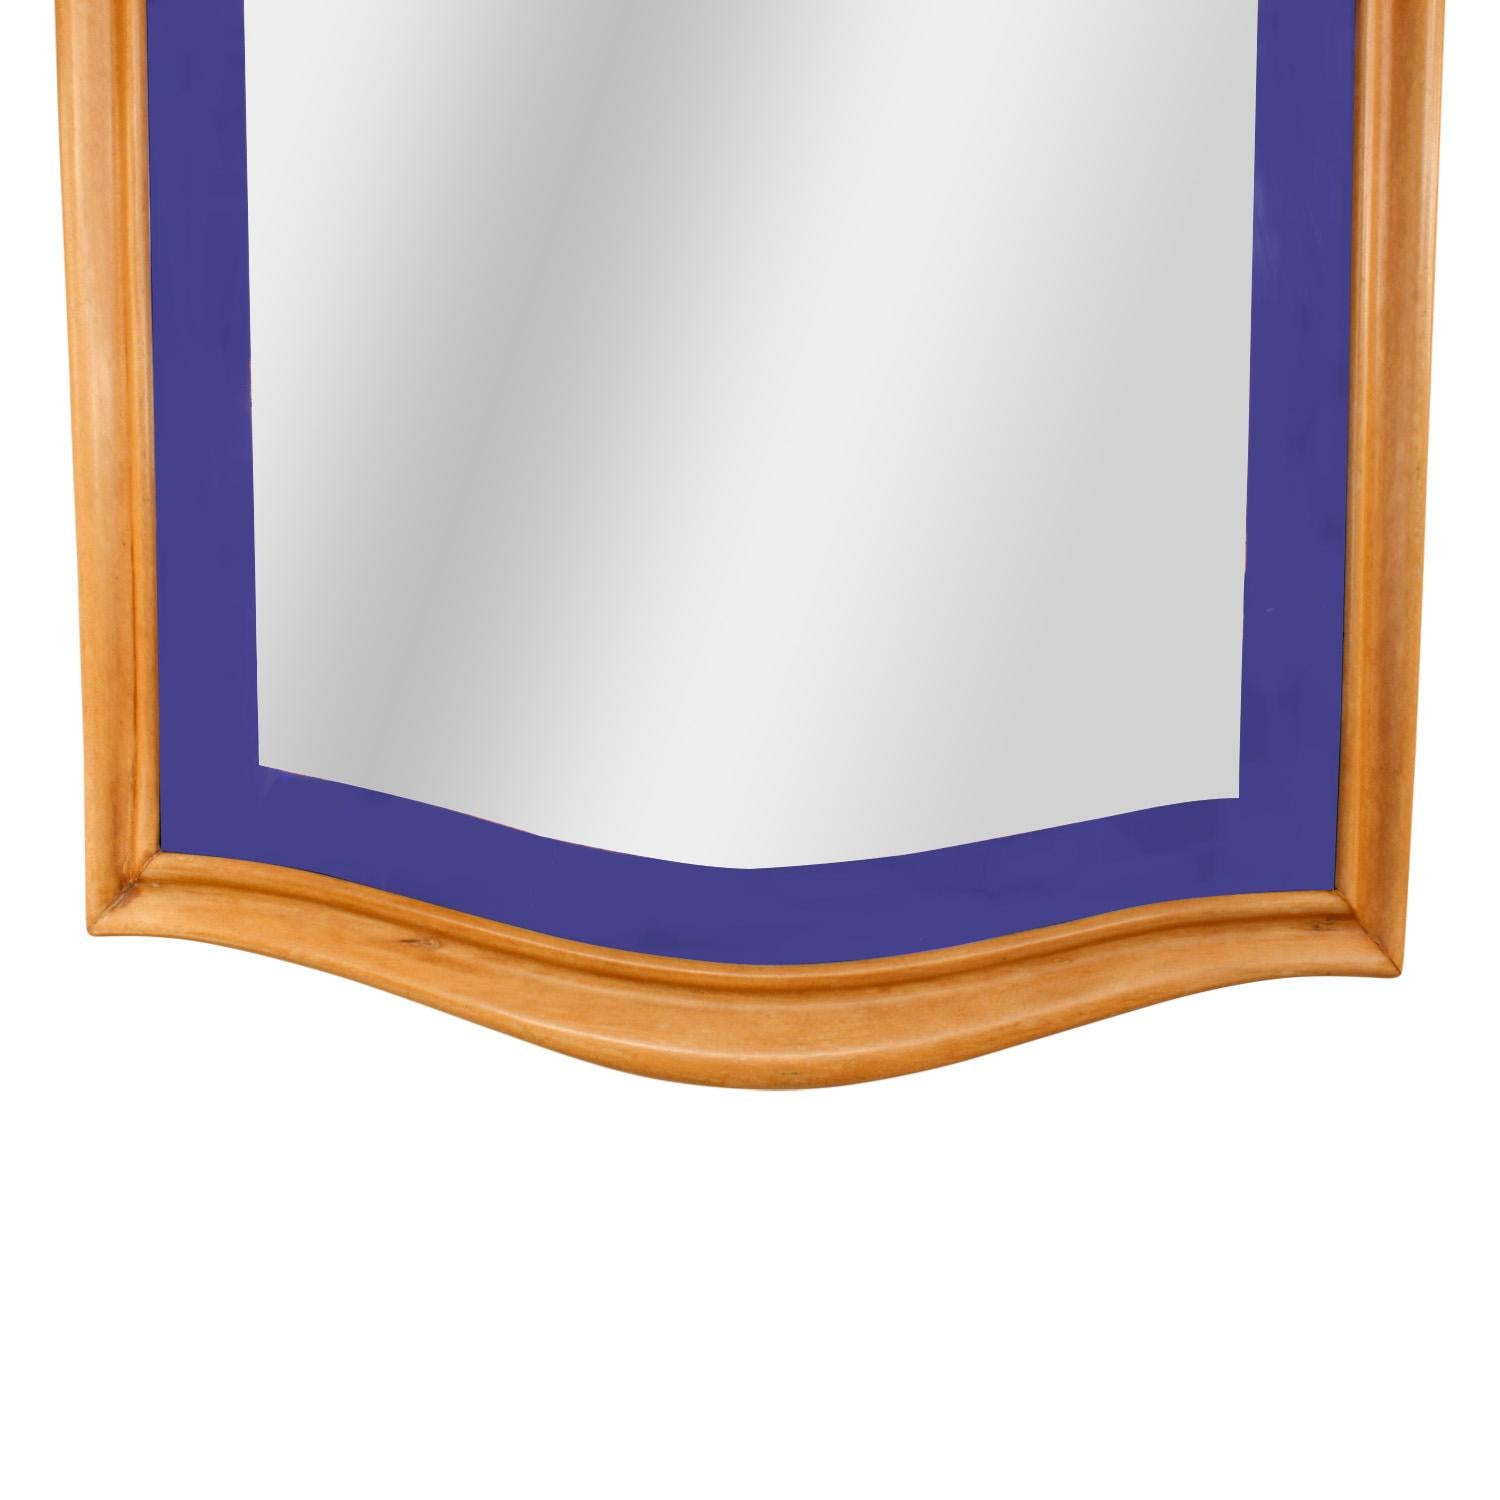 Hand-Crafted Stunning Italian Art Deco Mirror with Blue Edge 1930s For Sale